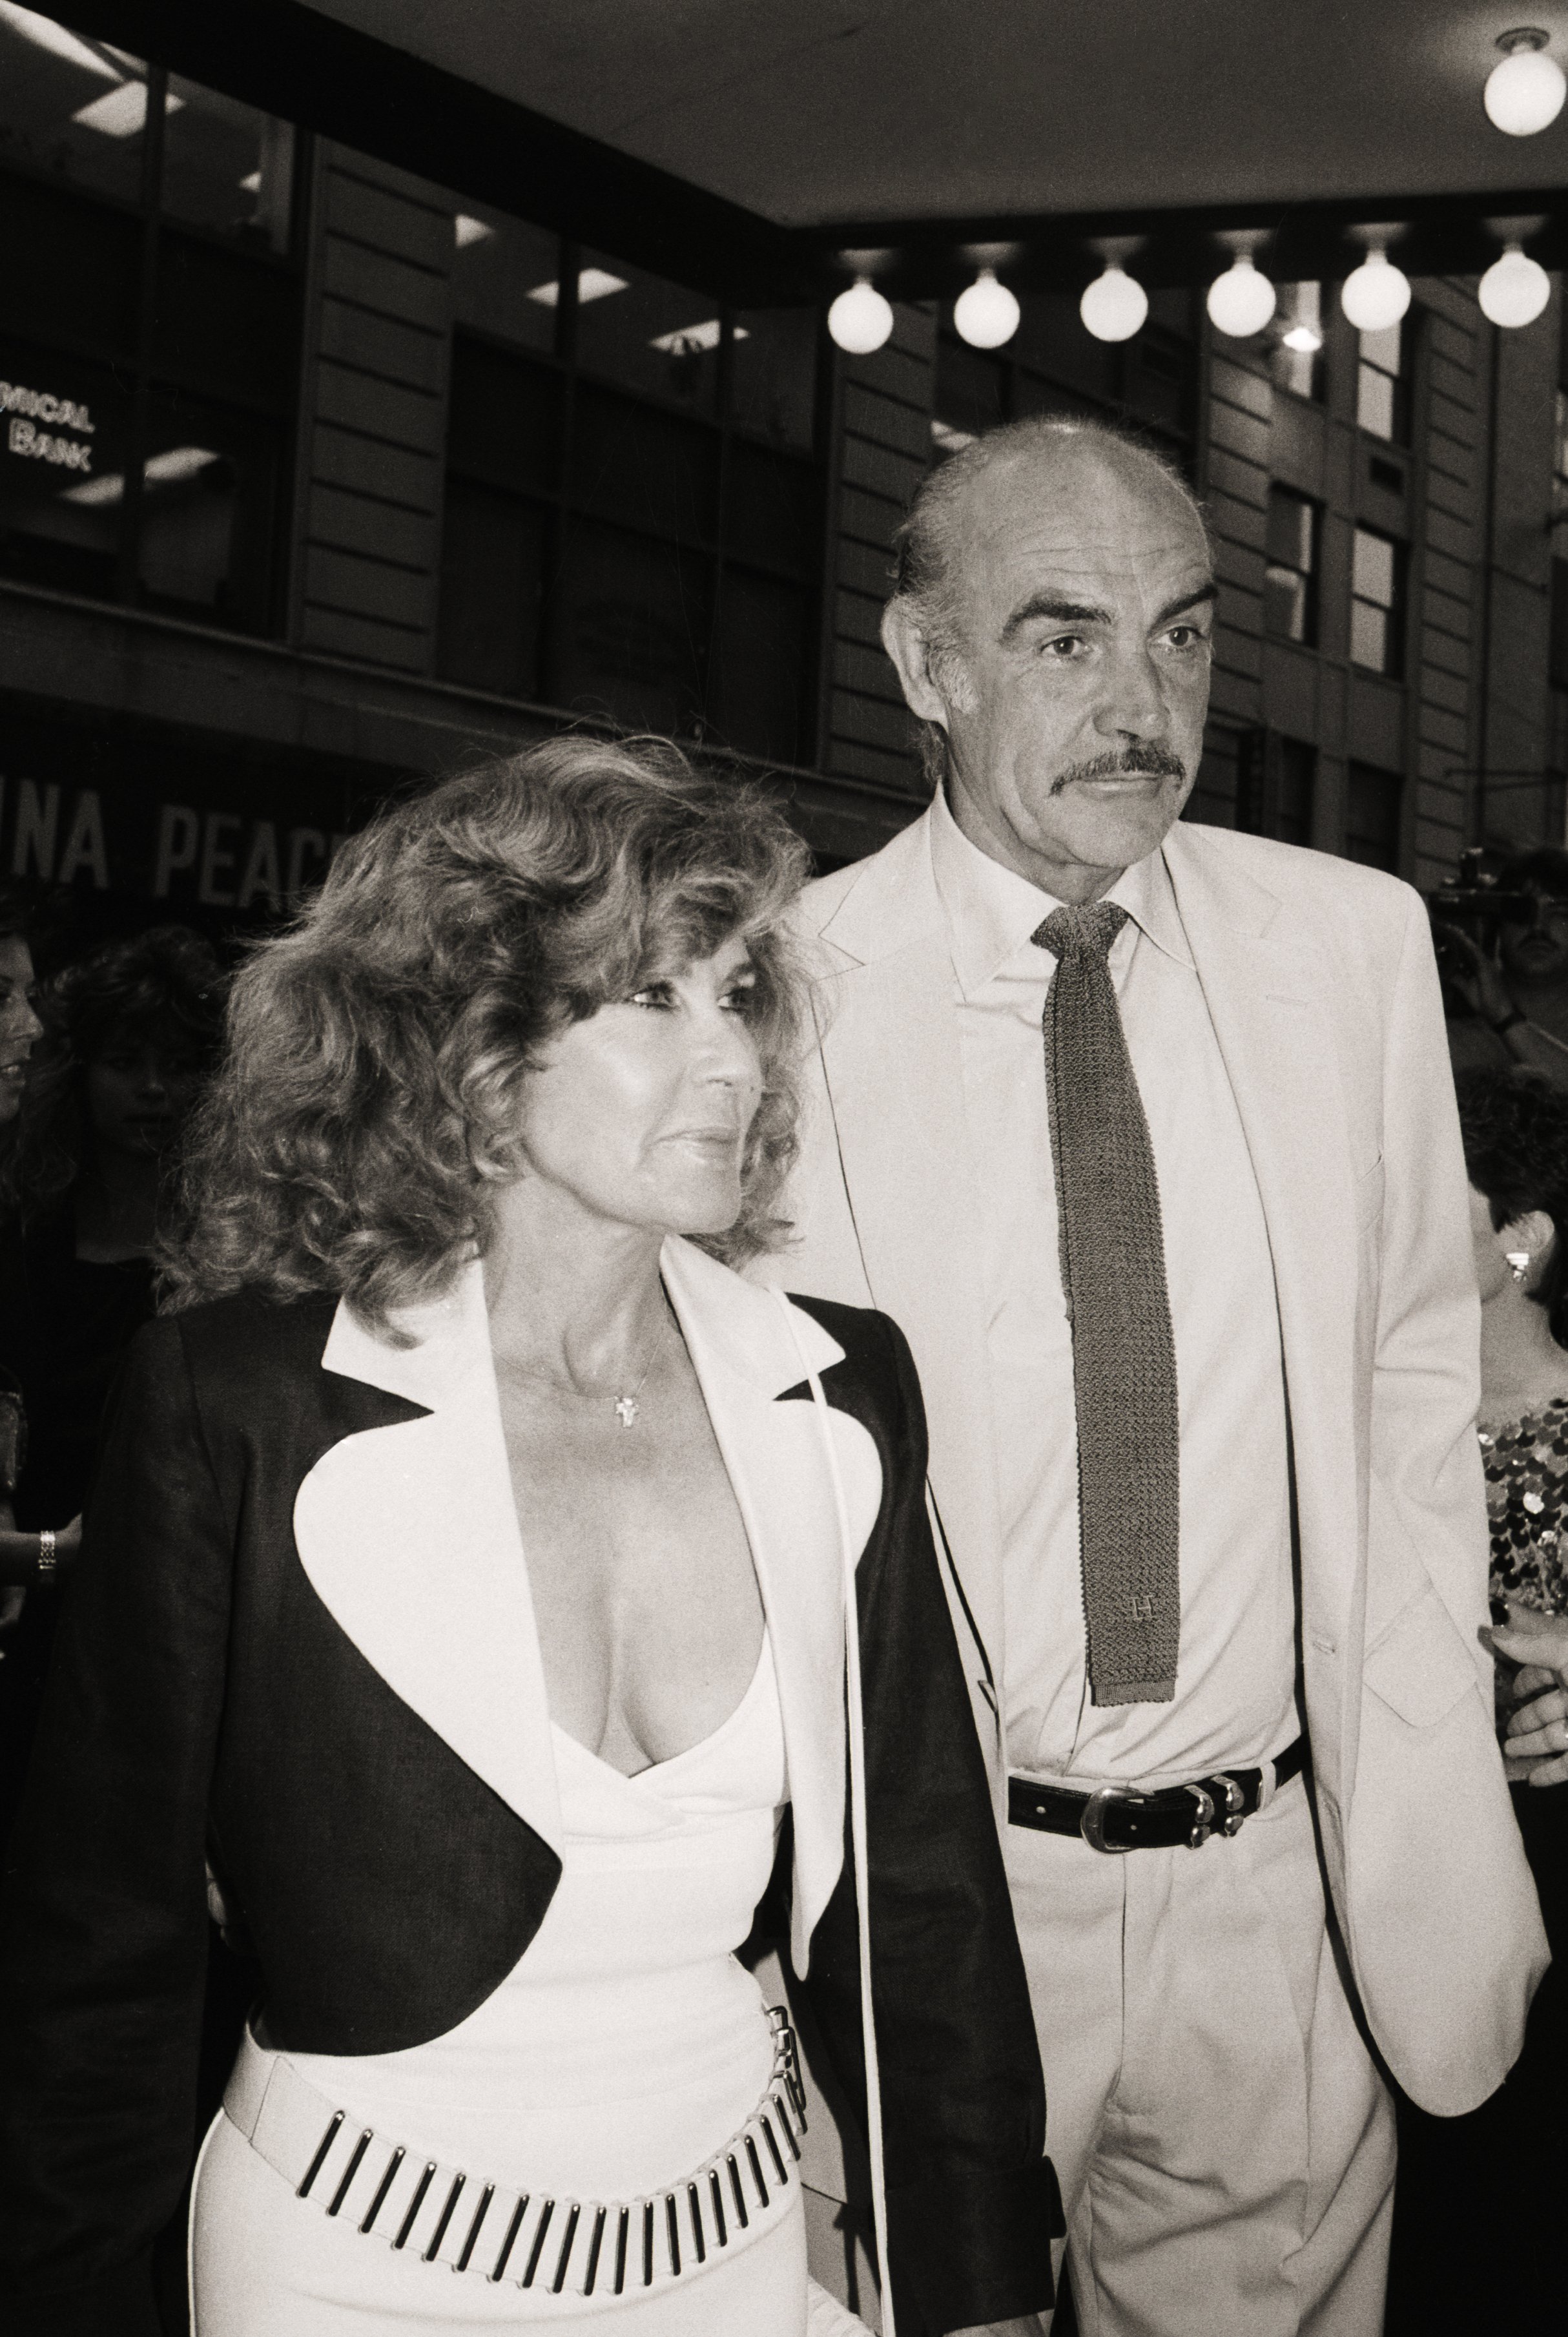 Sean Connery and Michelin Roquebrune arriving at the Loews Astor Plaza for the world premiere of "The Untouchables," on June 2, 1987 in New York, New York. / Source: Getty Images